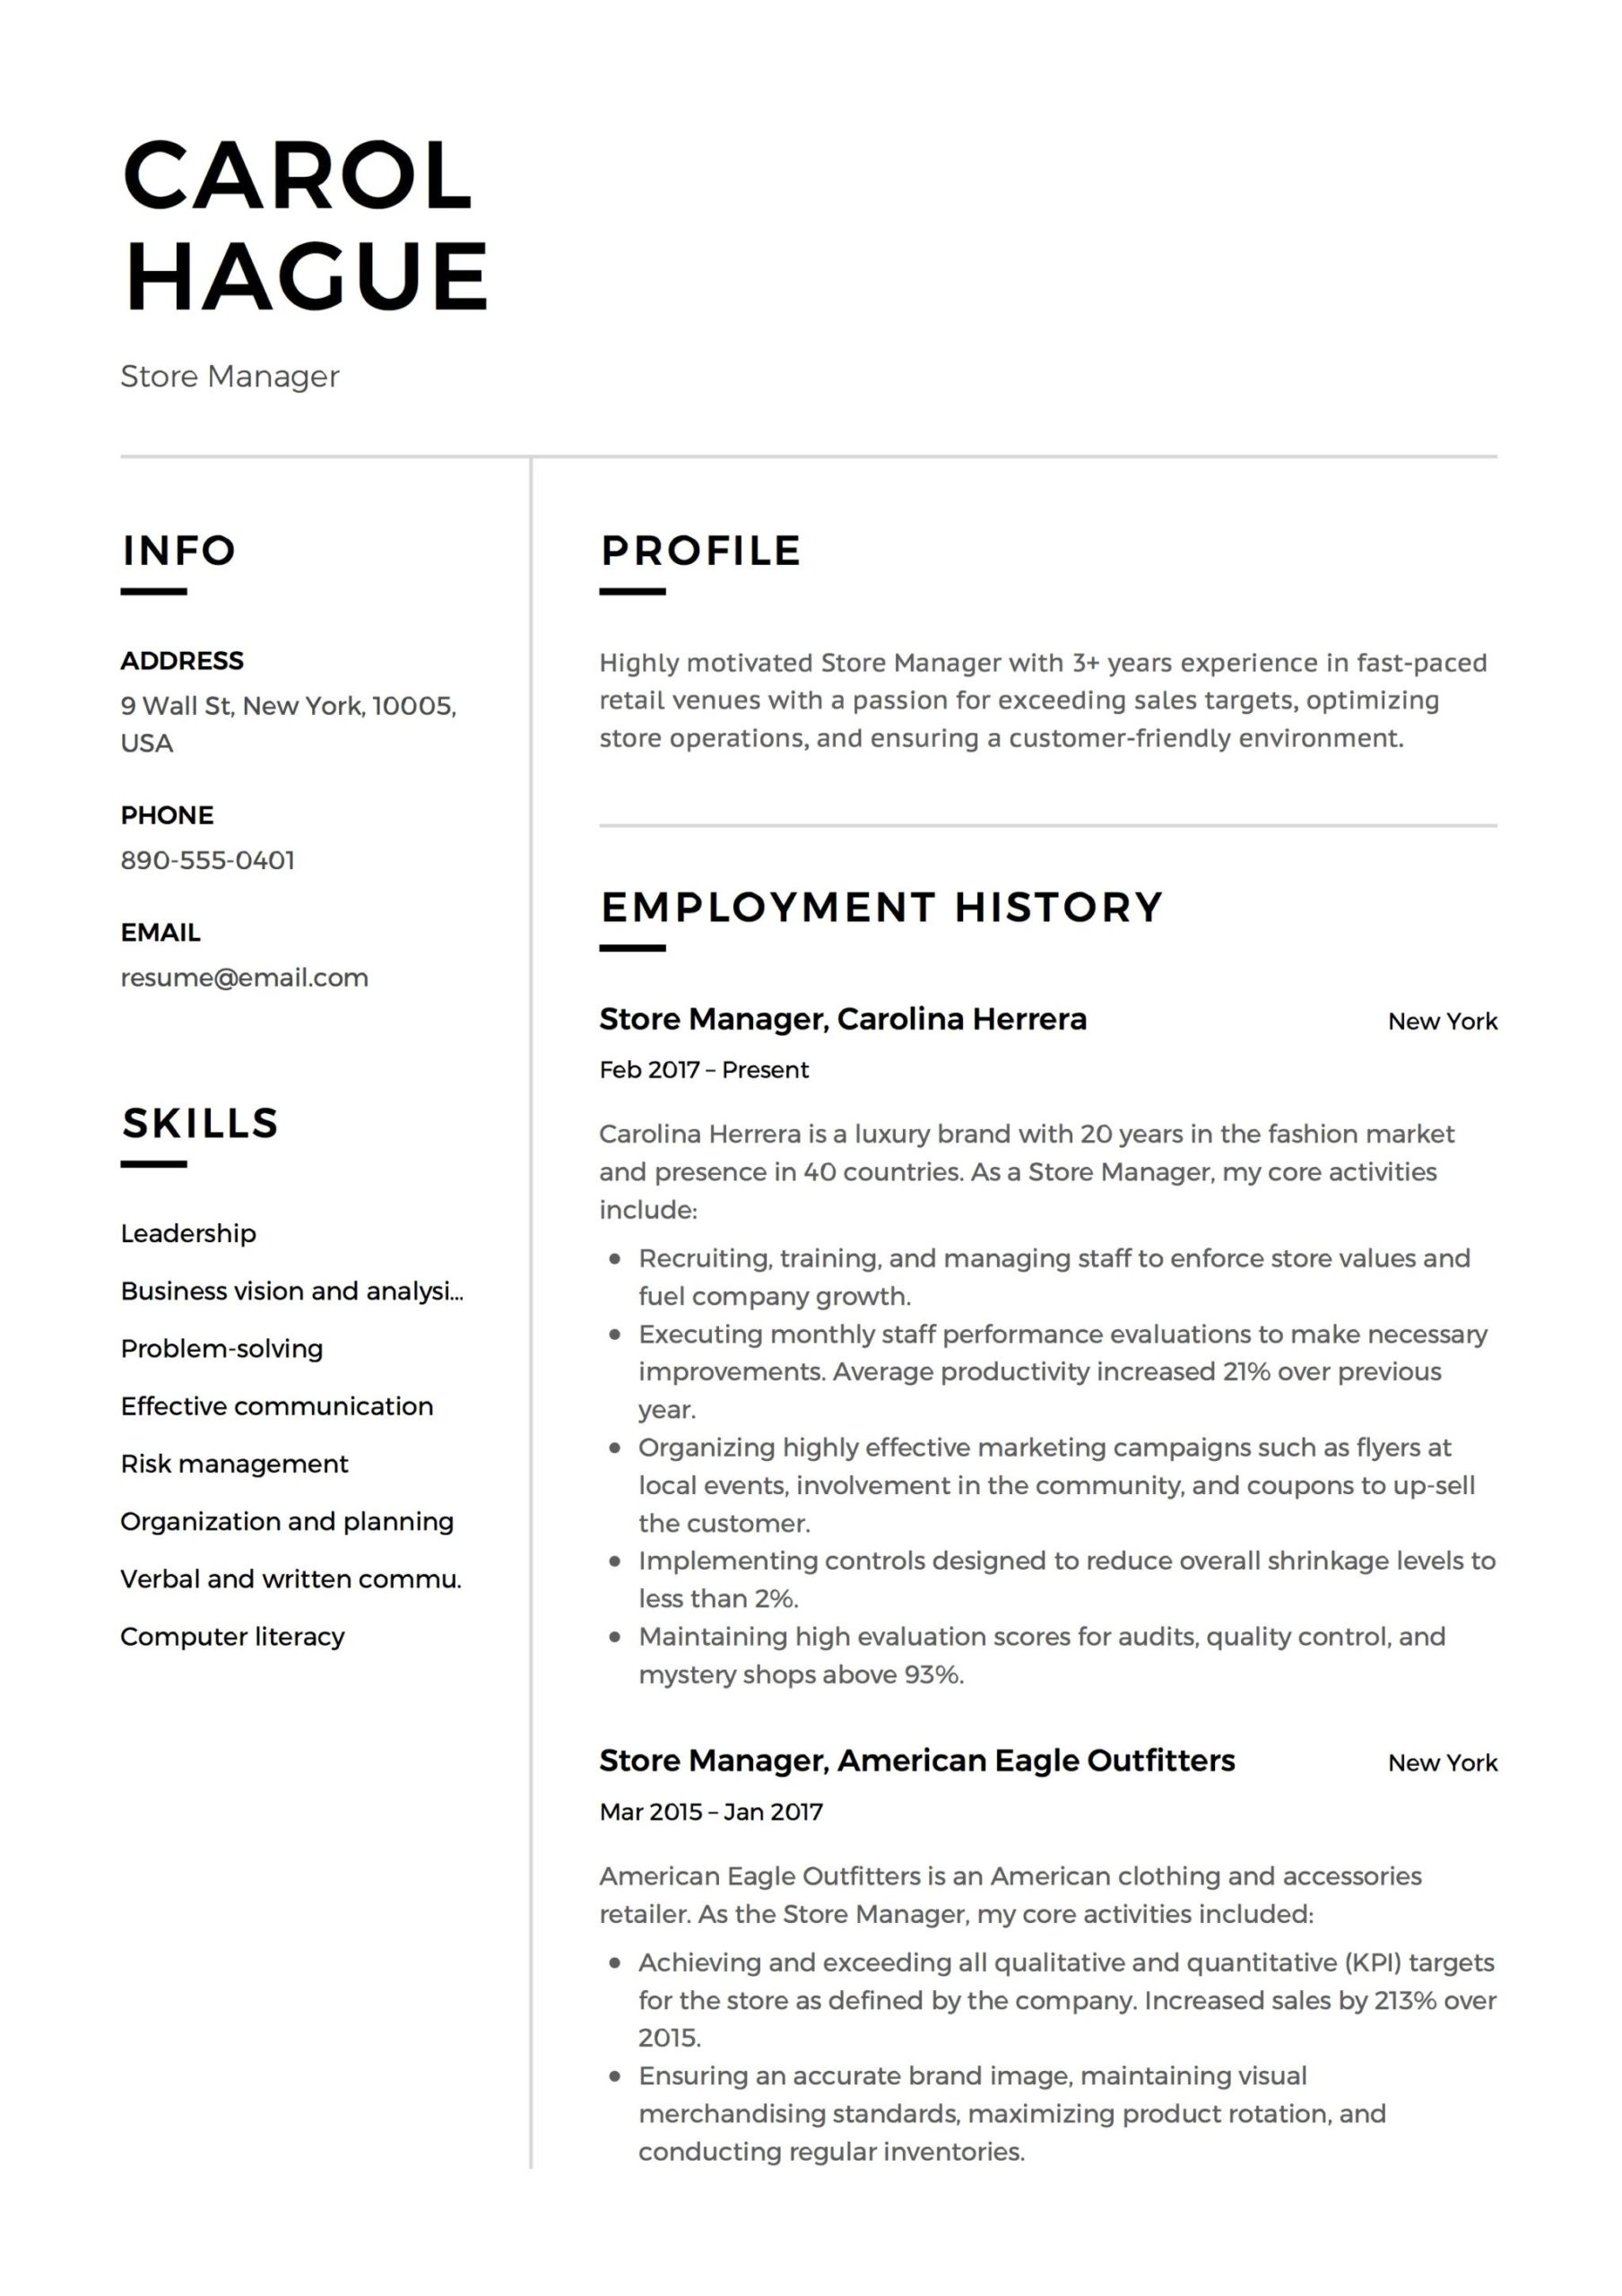 Sample Resume for A Retail Position Retail Resume Examples 2022 Free Downloads Pdfs